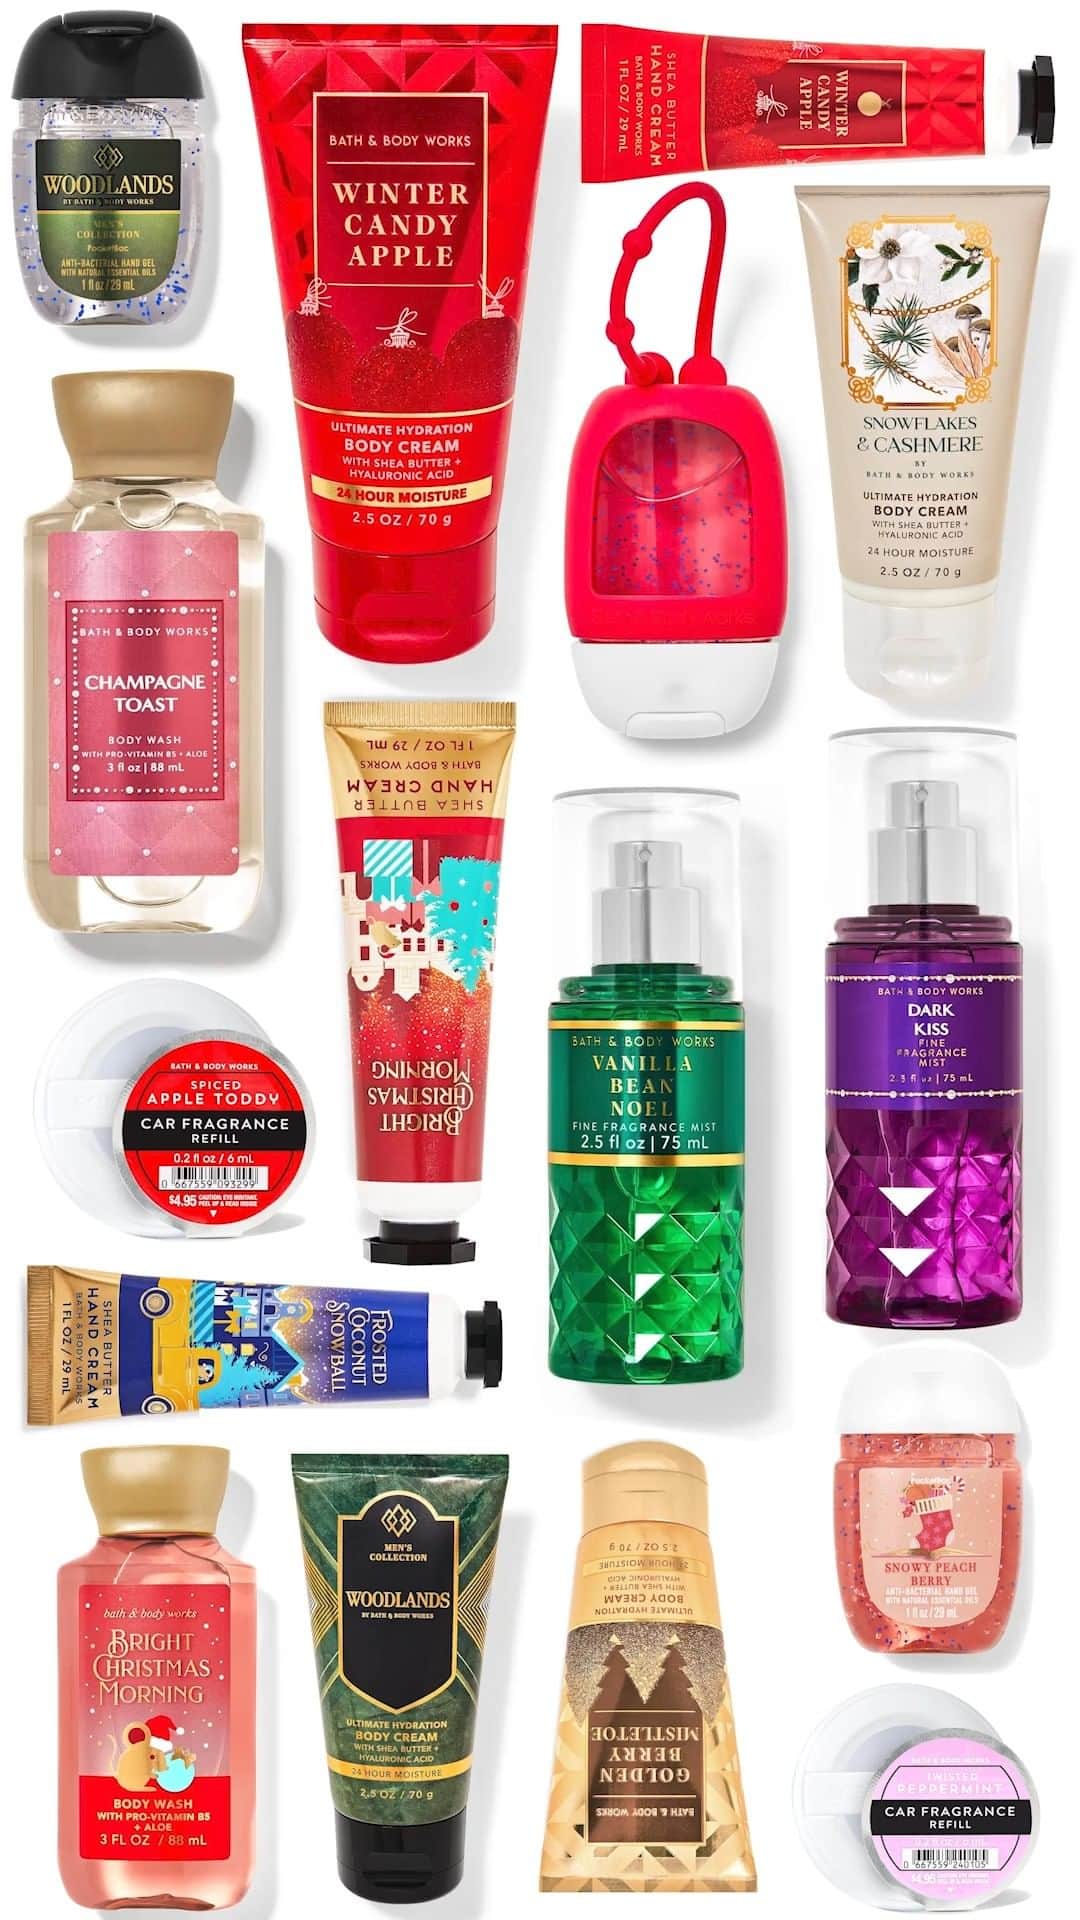 Bath & Body Worksのインスタグラム：「‼️GIFTING $3 AND UNDER STARTS TOMORROW‼️ Get ready to stuff those stockings to the brim with our top picks of the BEST (little) gifts to make your last-minute gifting EASY! 🎁​  🗓️ Dec 13 + 14​ 🤑 $1 PocketBac Hand Sanitizers & Select Clips​ 😆 $2 Car Fragrance Refills & Hand Cream​ 🤩 $3 Hand Sanitizer Spray, Fun Size Fragrances, Lip Care & Bar Soap​ 🛍️ IN STORES ONLY! (or buy online and pick up in store)」